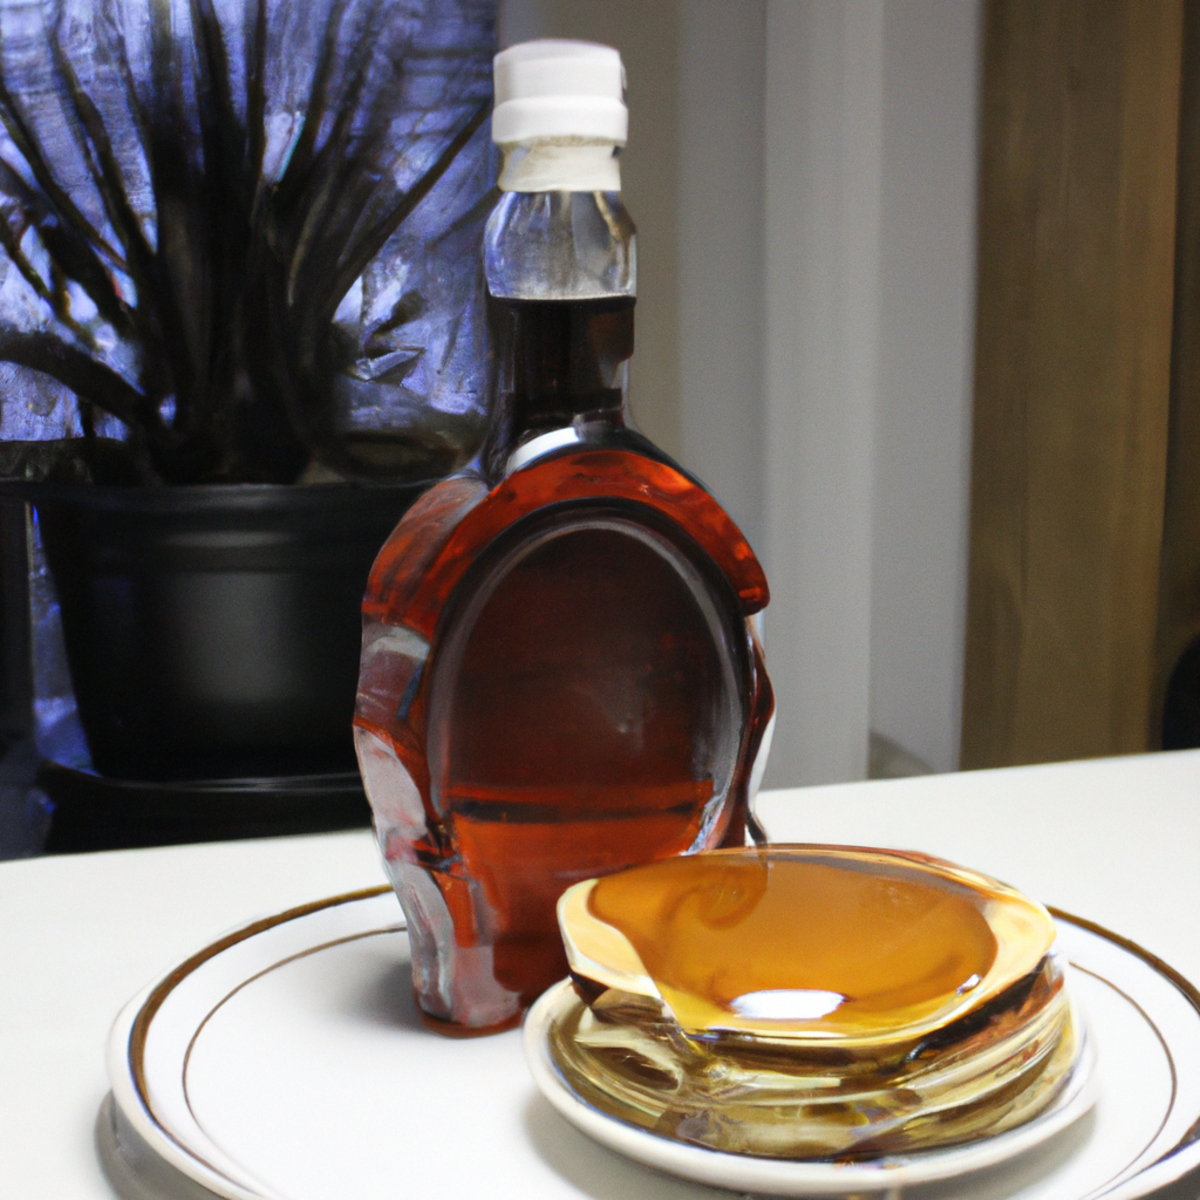 Serene breakfast table with fluffy pancakes, vintage syrup bottle, and delicate floral patterns, inviting readers to explore MSUD stories -Maple Syrup Urine Disease (MSUD)